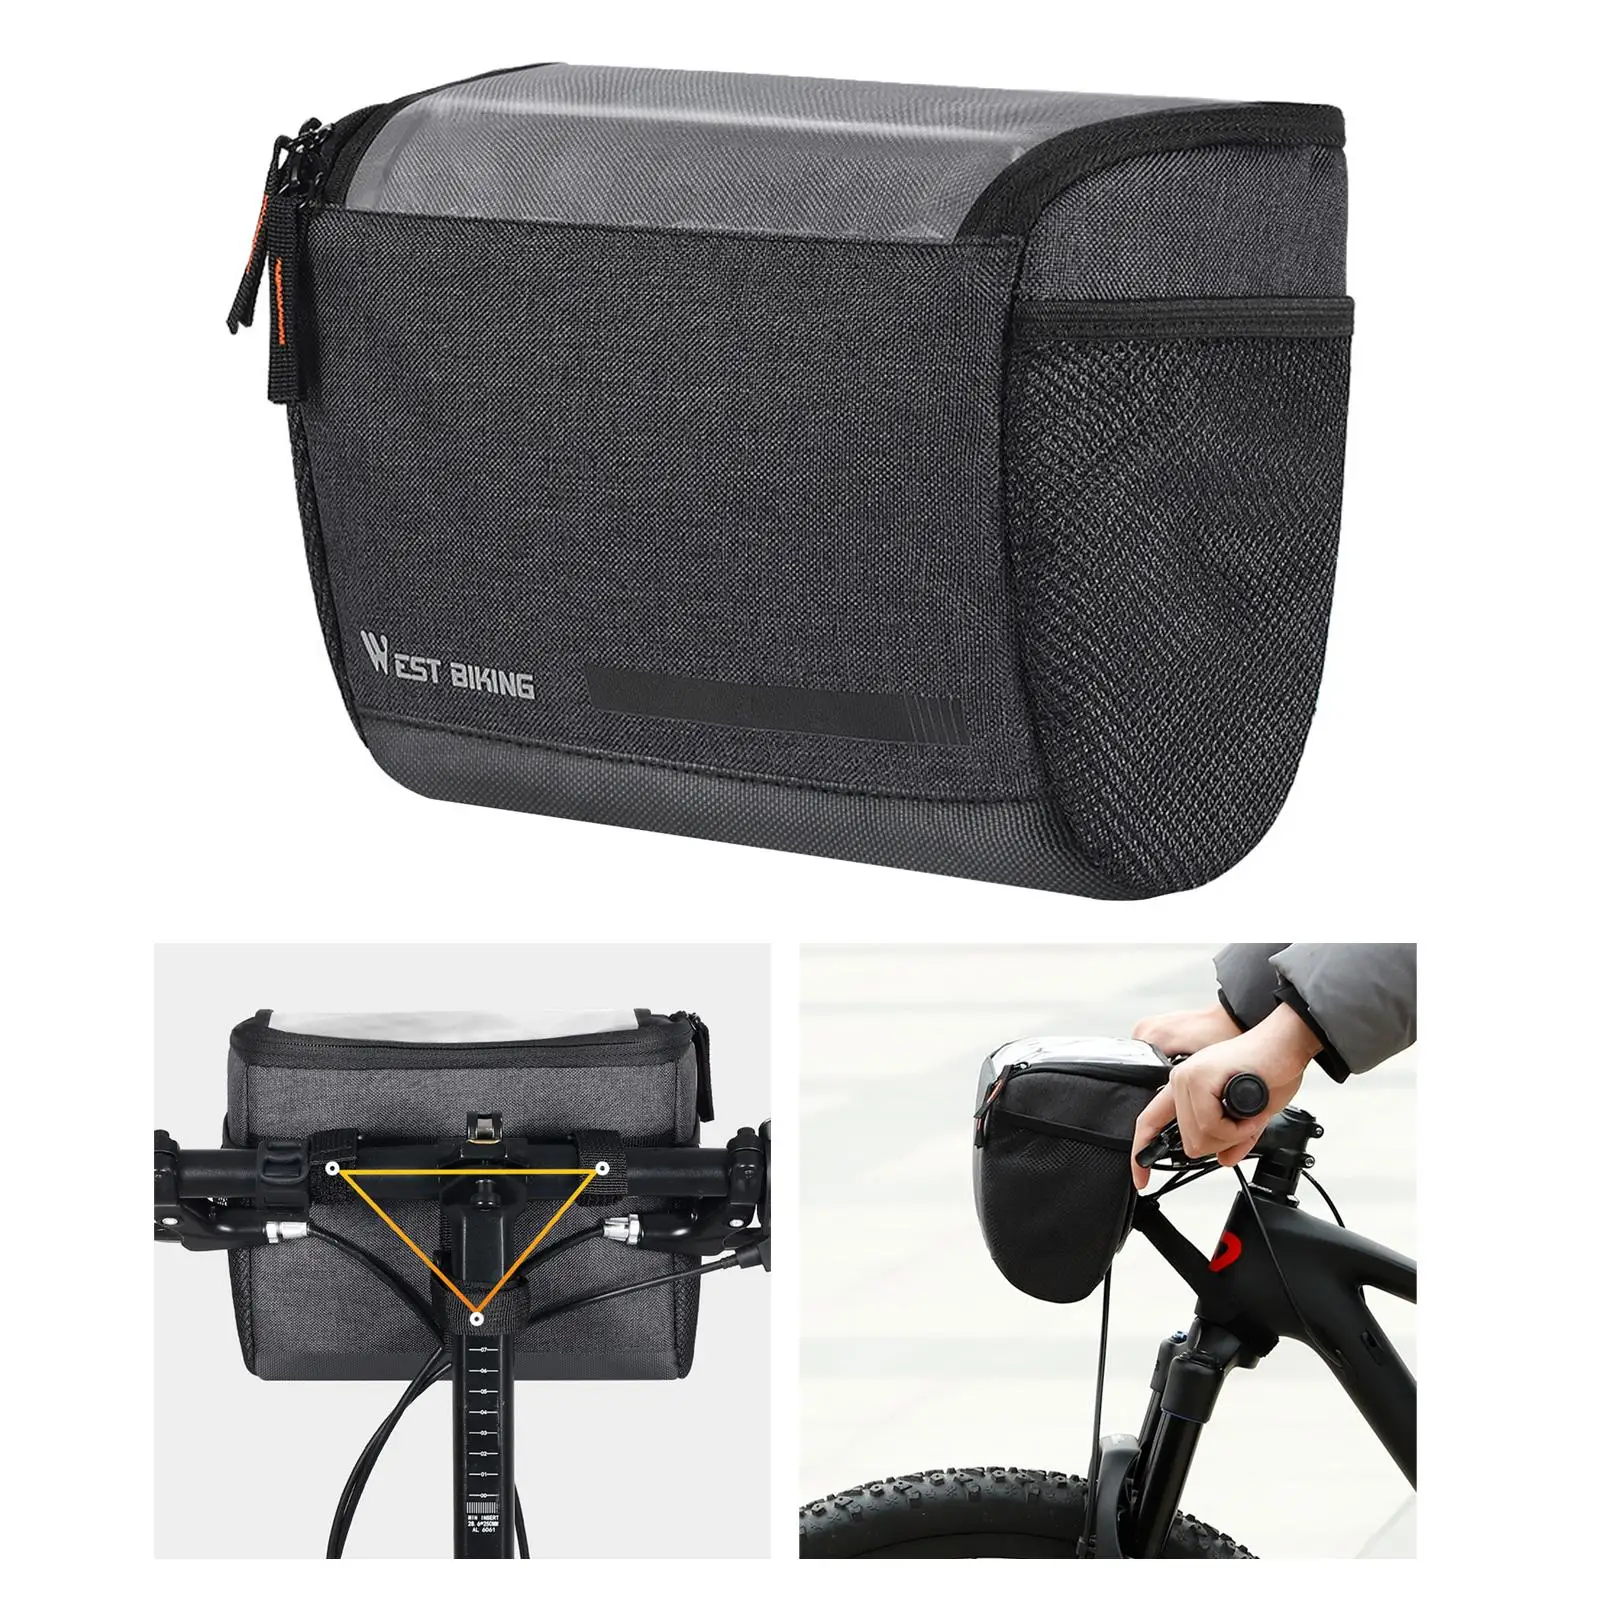 Bicycle Bag Insulated Trunk Cooler Pack Cycling Bicycle Rear Rack Storage Luggage Pouch MTB Bike Pannier Shoulder Bag